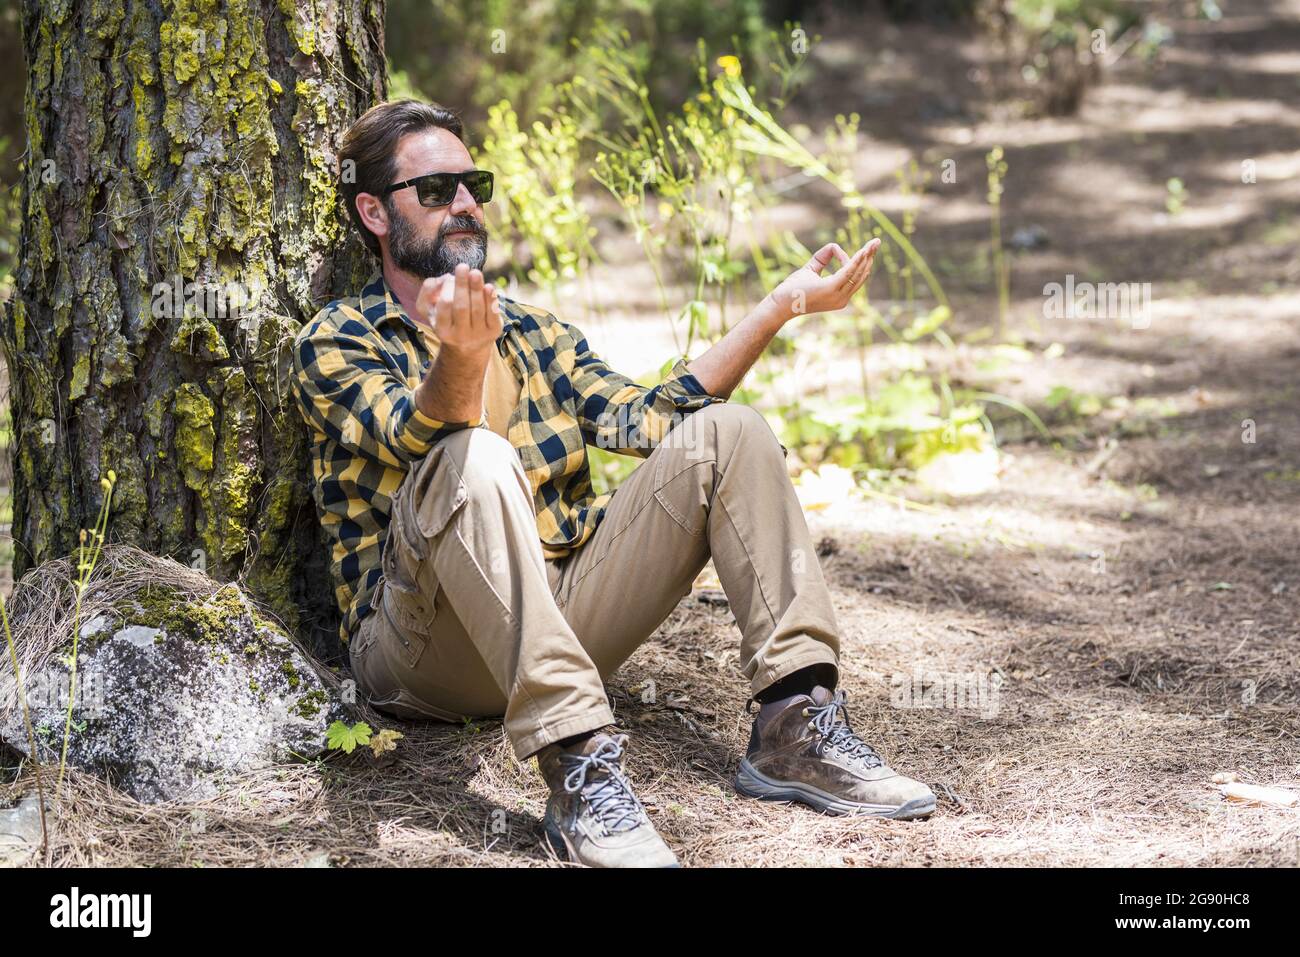 Man doing relaxation exercise in forest Stock Photo